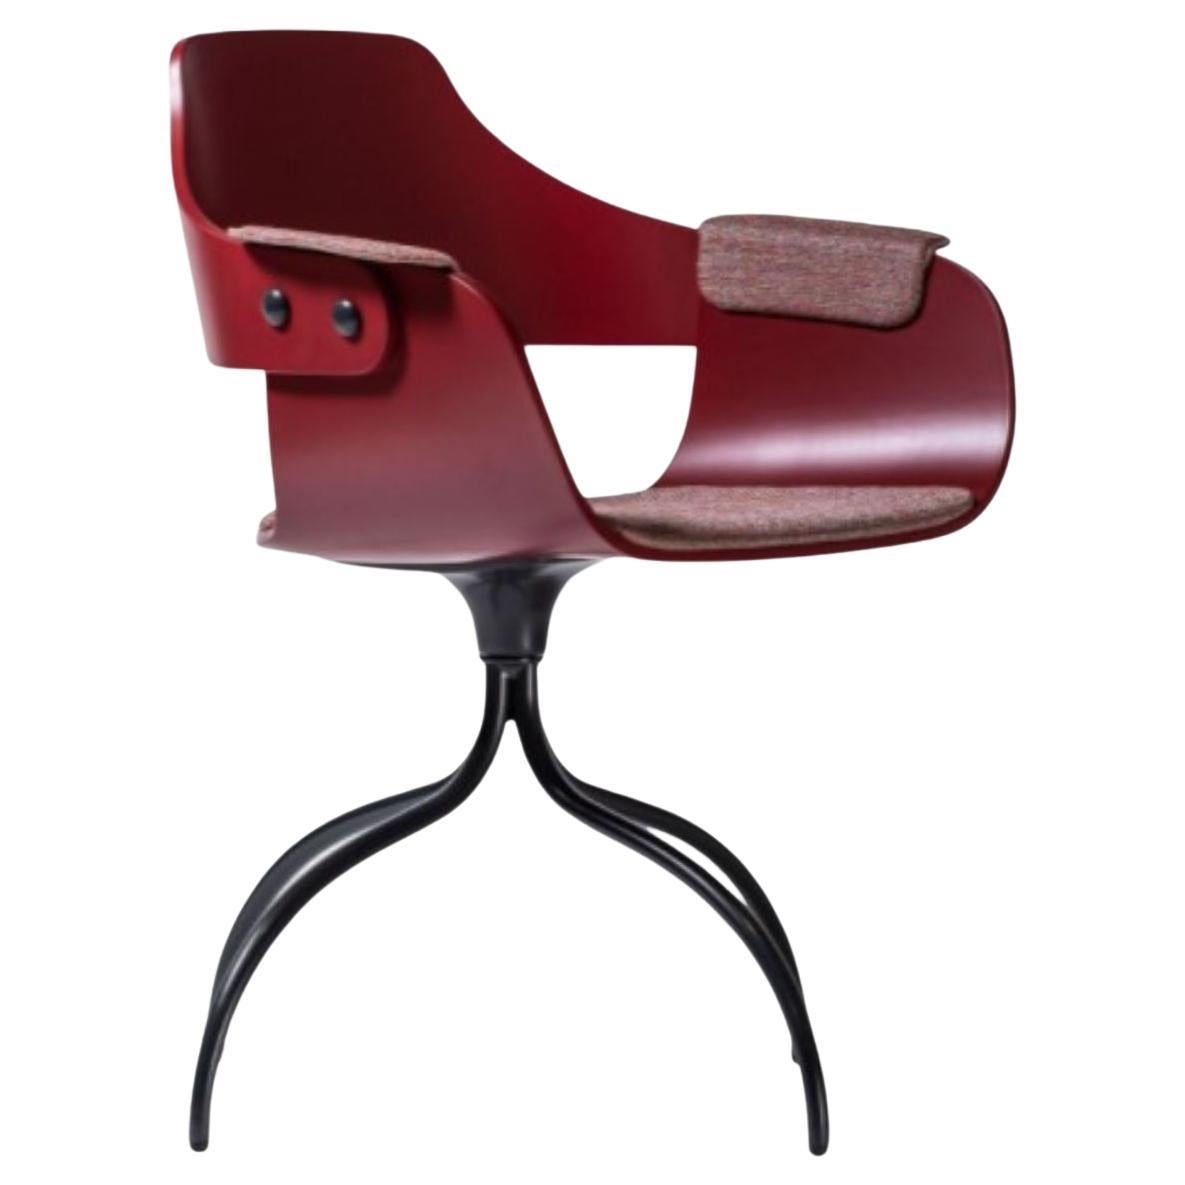 Swivel Base Showtime Red Ash Chair by Jaime Hayon